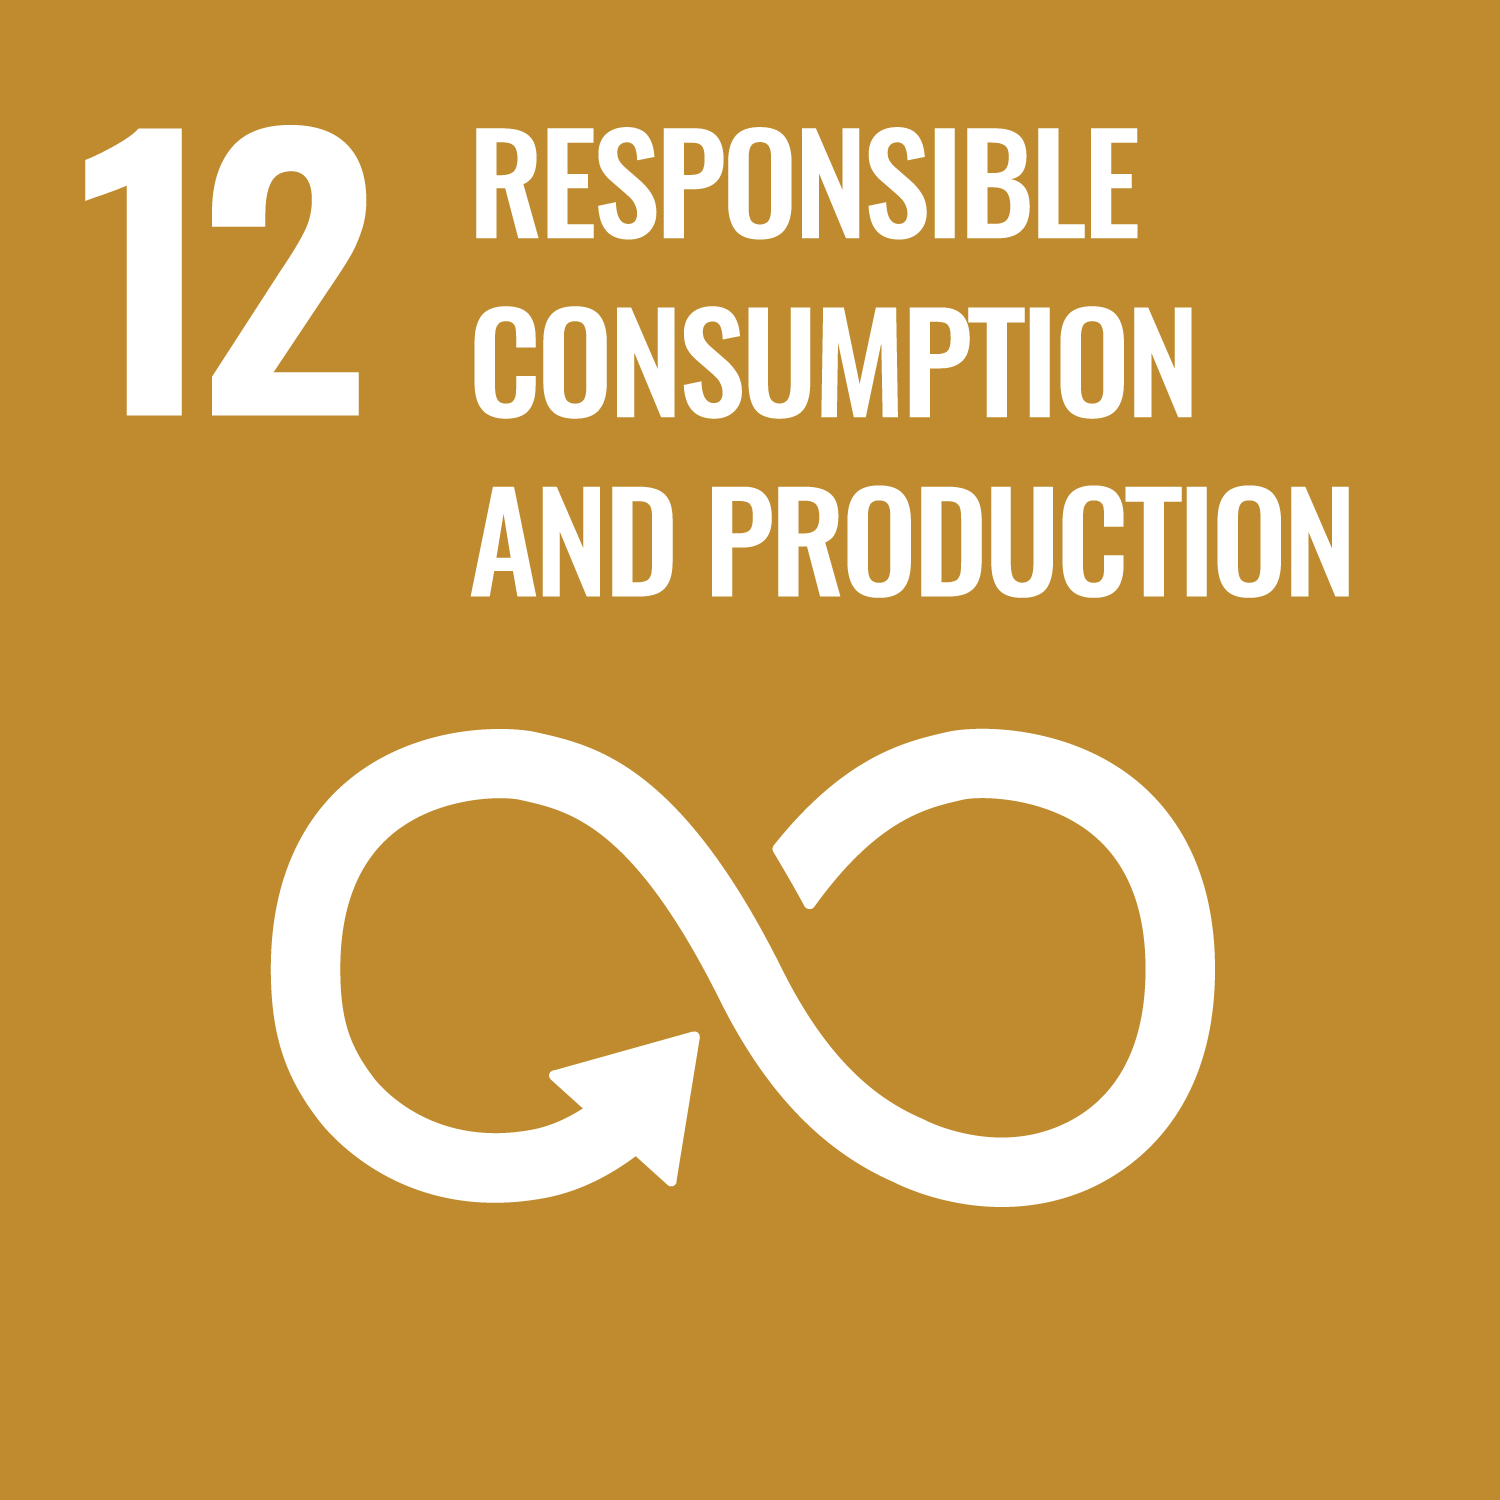 The official logo of the United Nations Sustainable Development Goal #12: Responsible consumption and production.